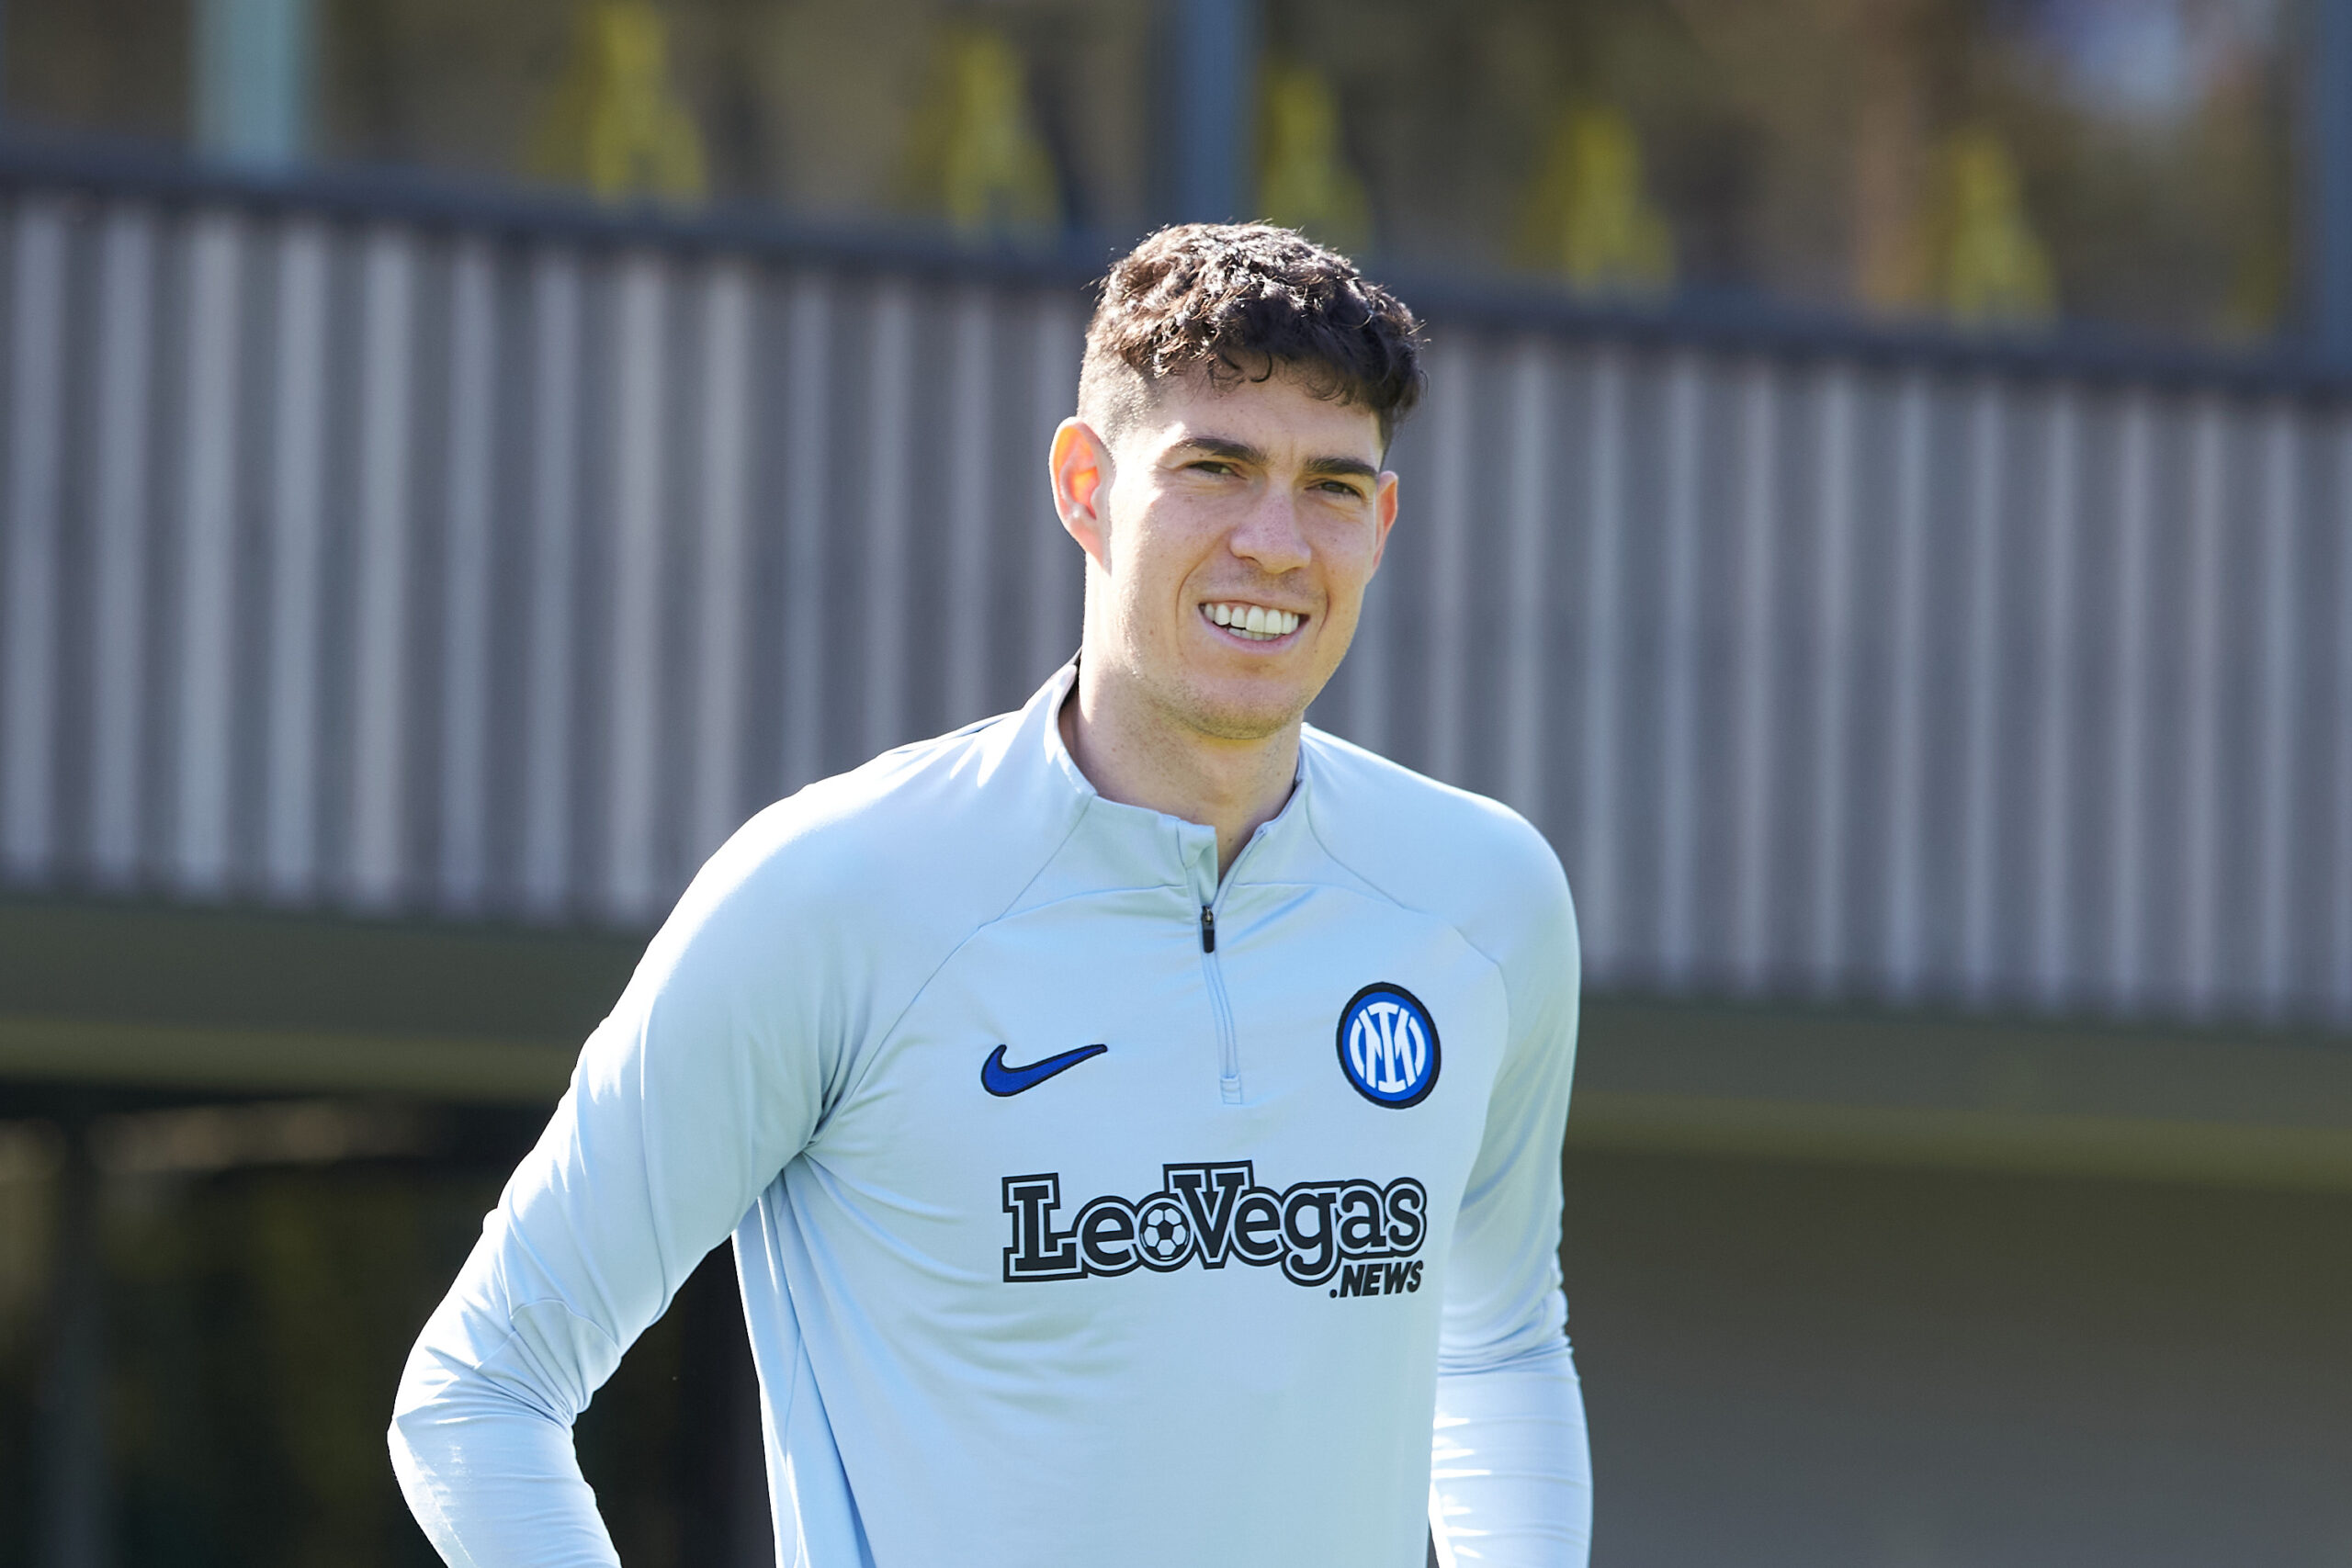 Inter want to retain all their stars next summer, unlike in the previous ones, and have set a sky-high valuation for Alessandro Bastoni, who’s routinely pursued by the top European clubs.